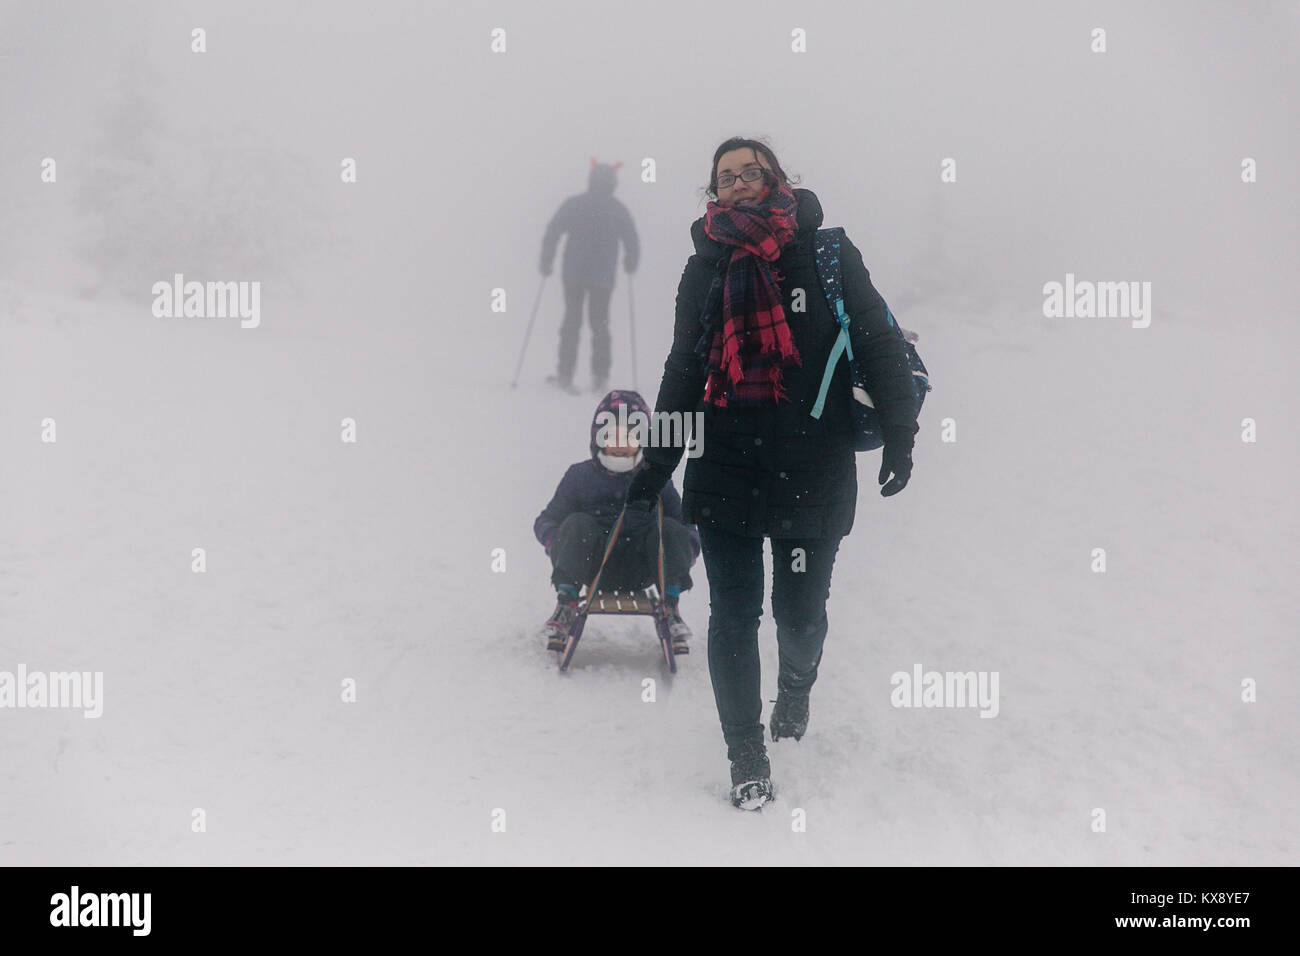 Mum pulling sledge with her daughter at the covered in snow and mist summit of Skrzyczne mountain in Szczyrk Poland Stock Photo